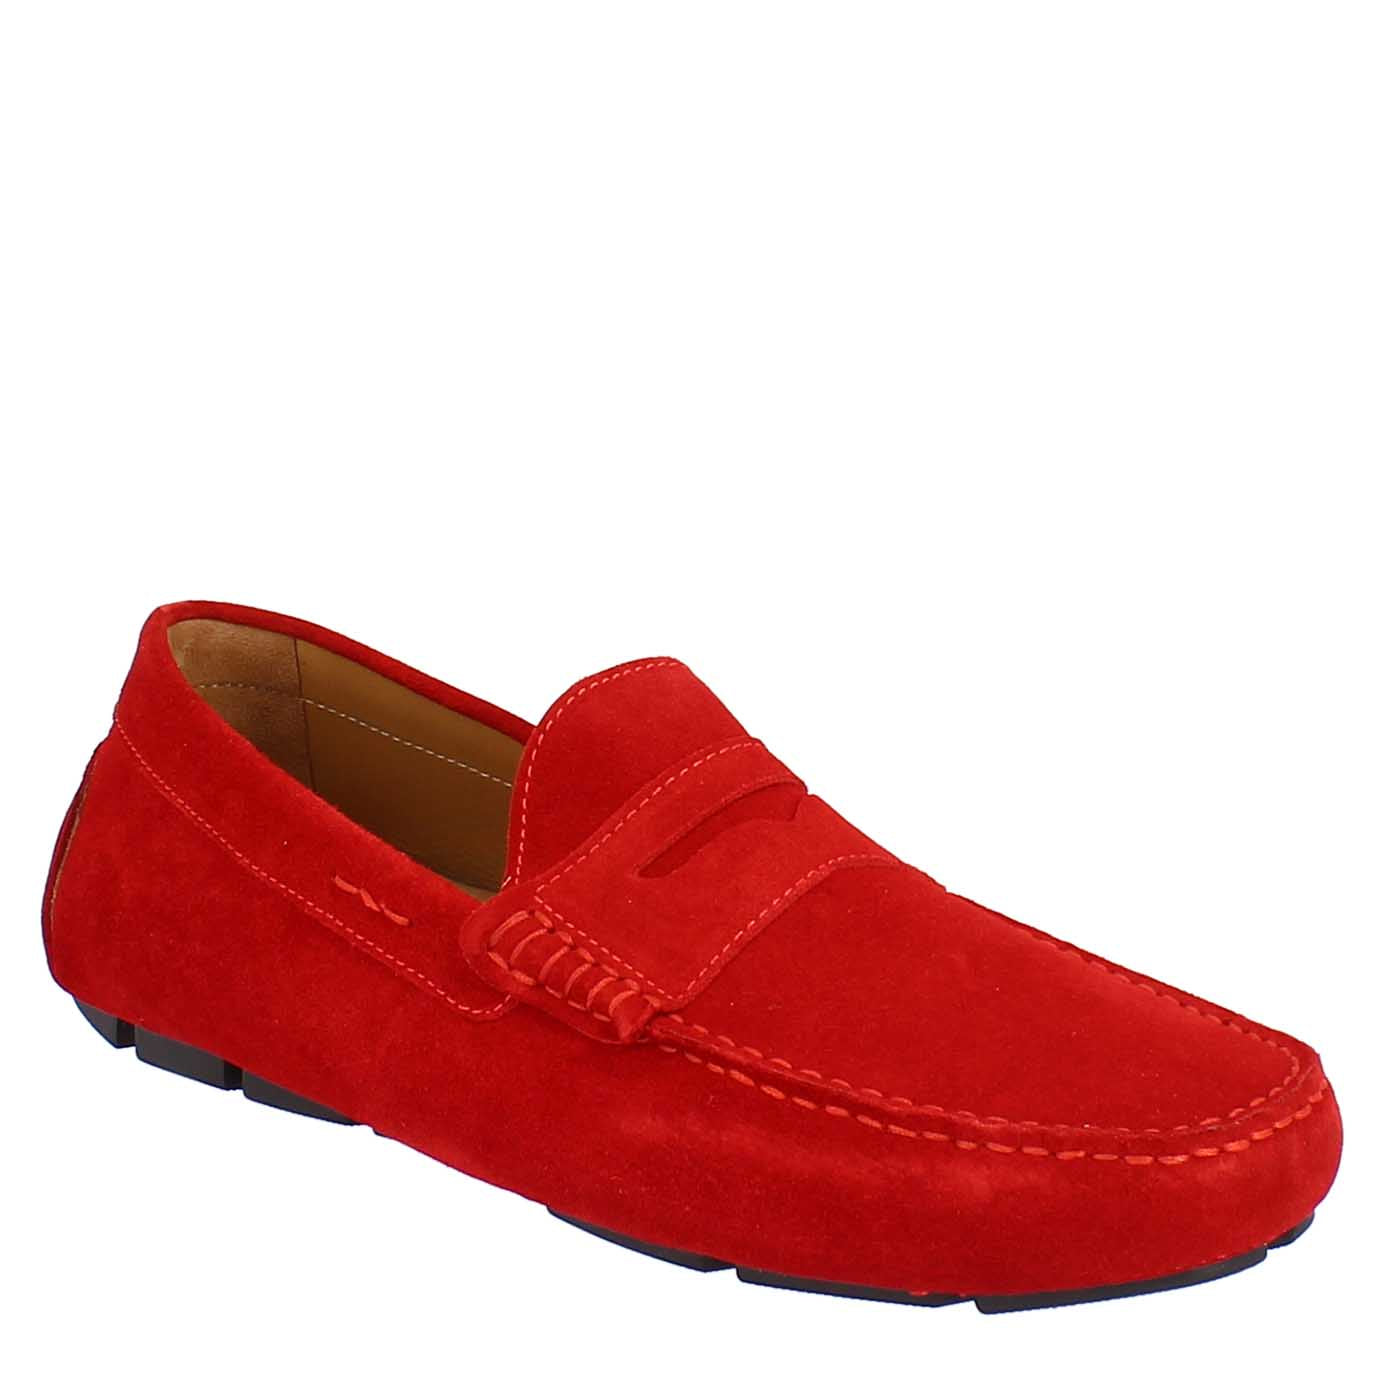 Women's Red Suede Loafers